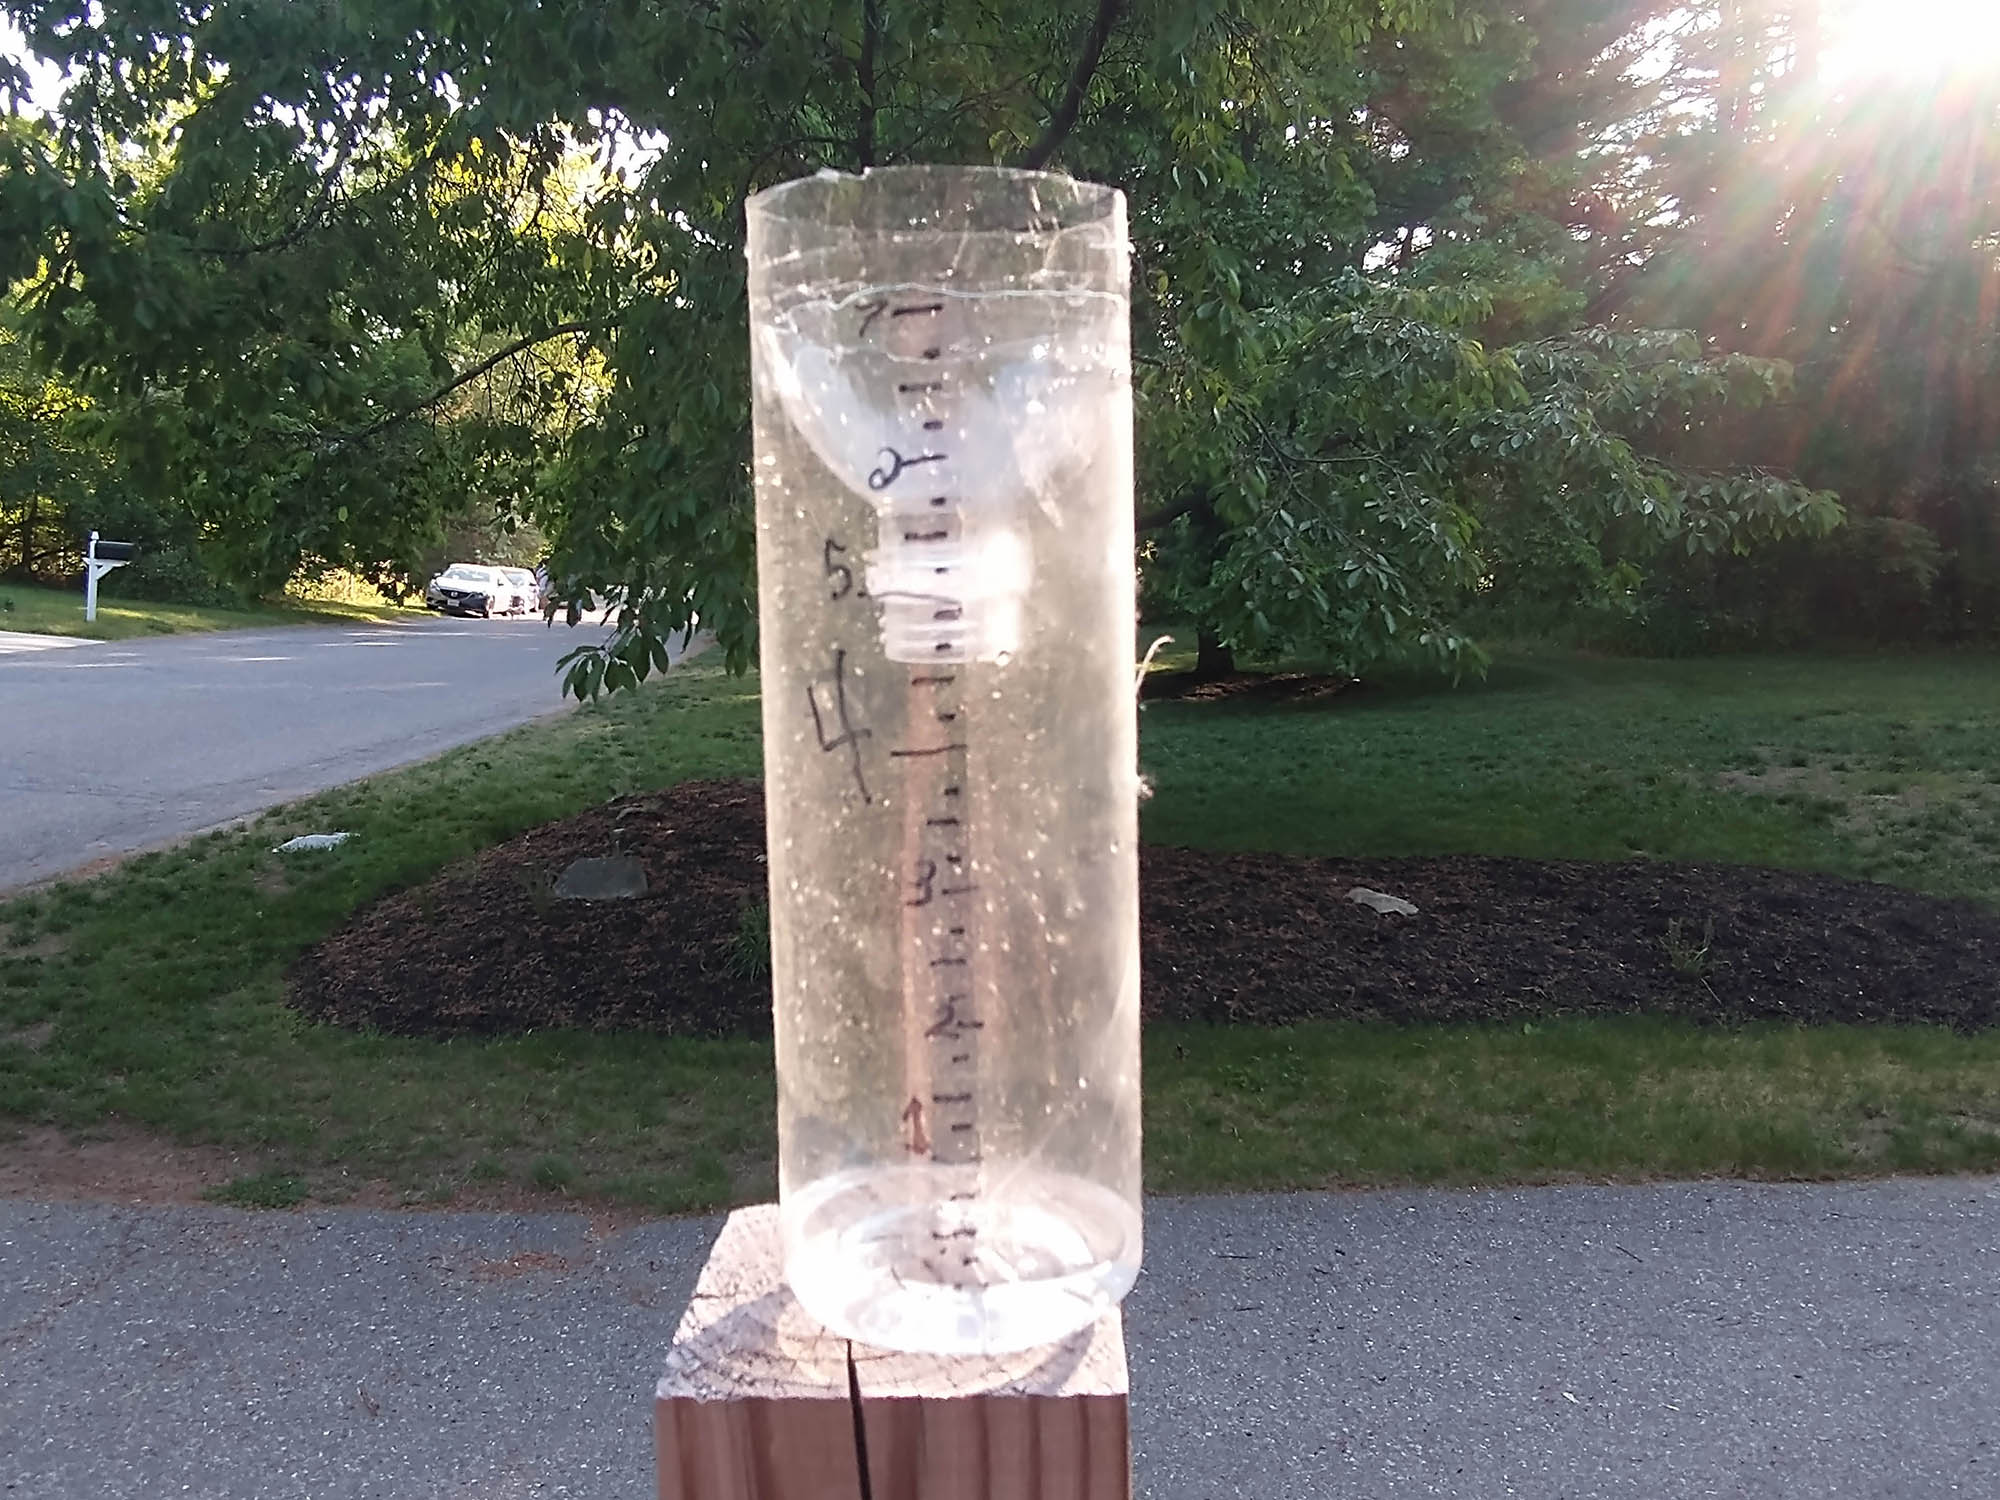 A DIY rain gauge made out of a plastic container, set up outside.